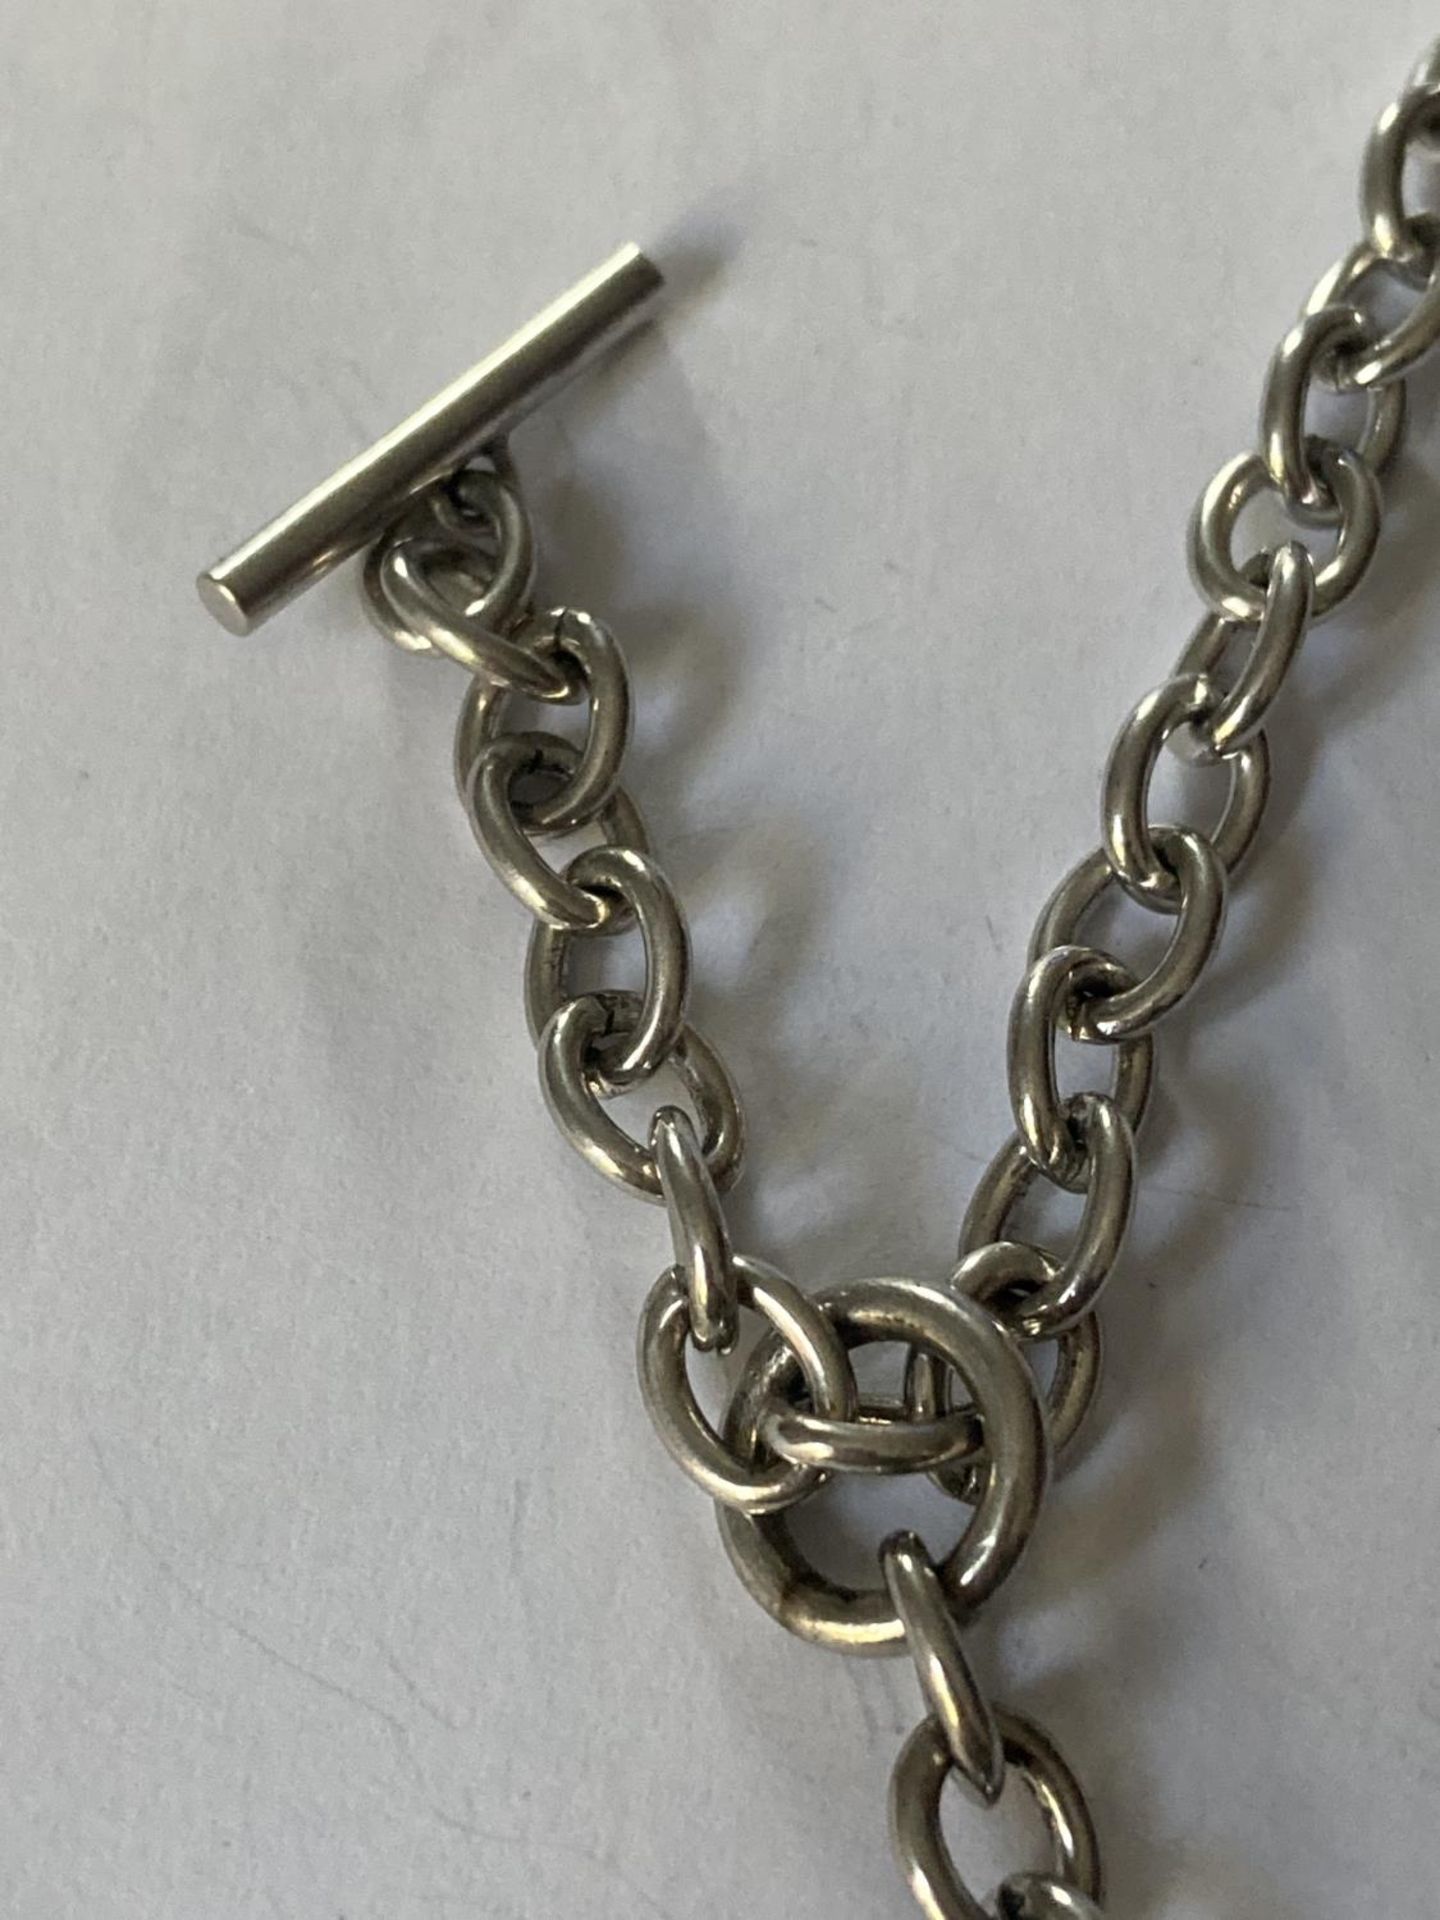 A SILVER HOT DIAMOND T-BAR NECK CHAIN - Image 3 of 3